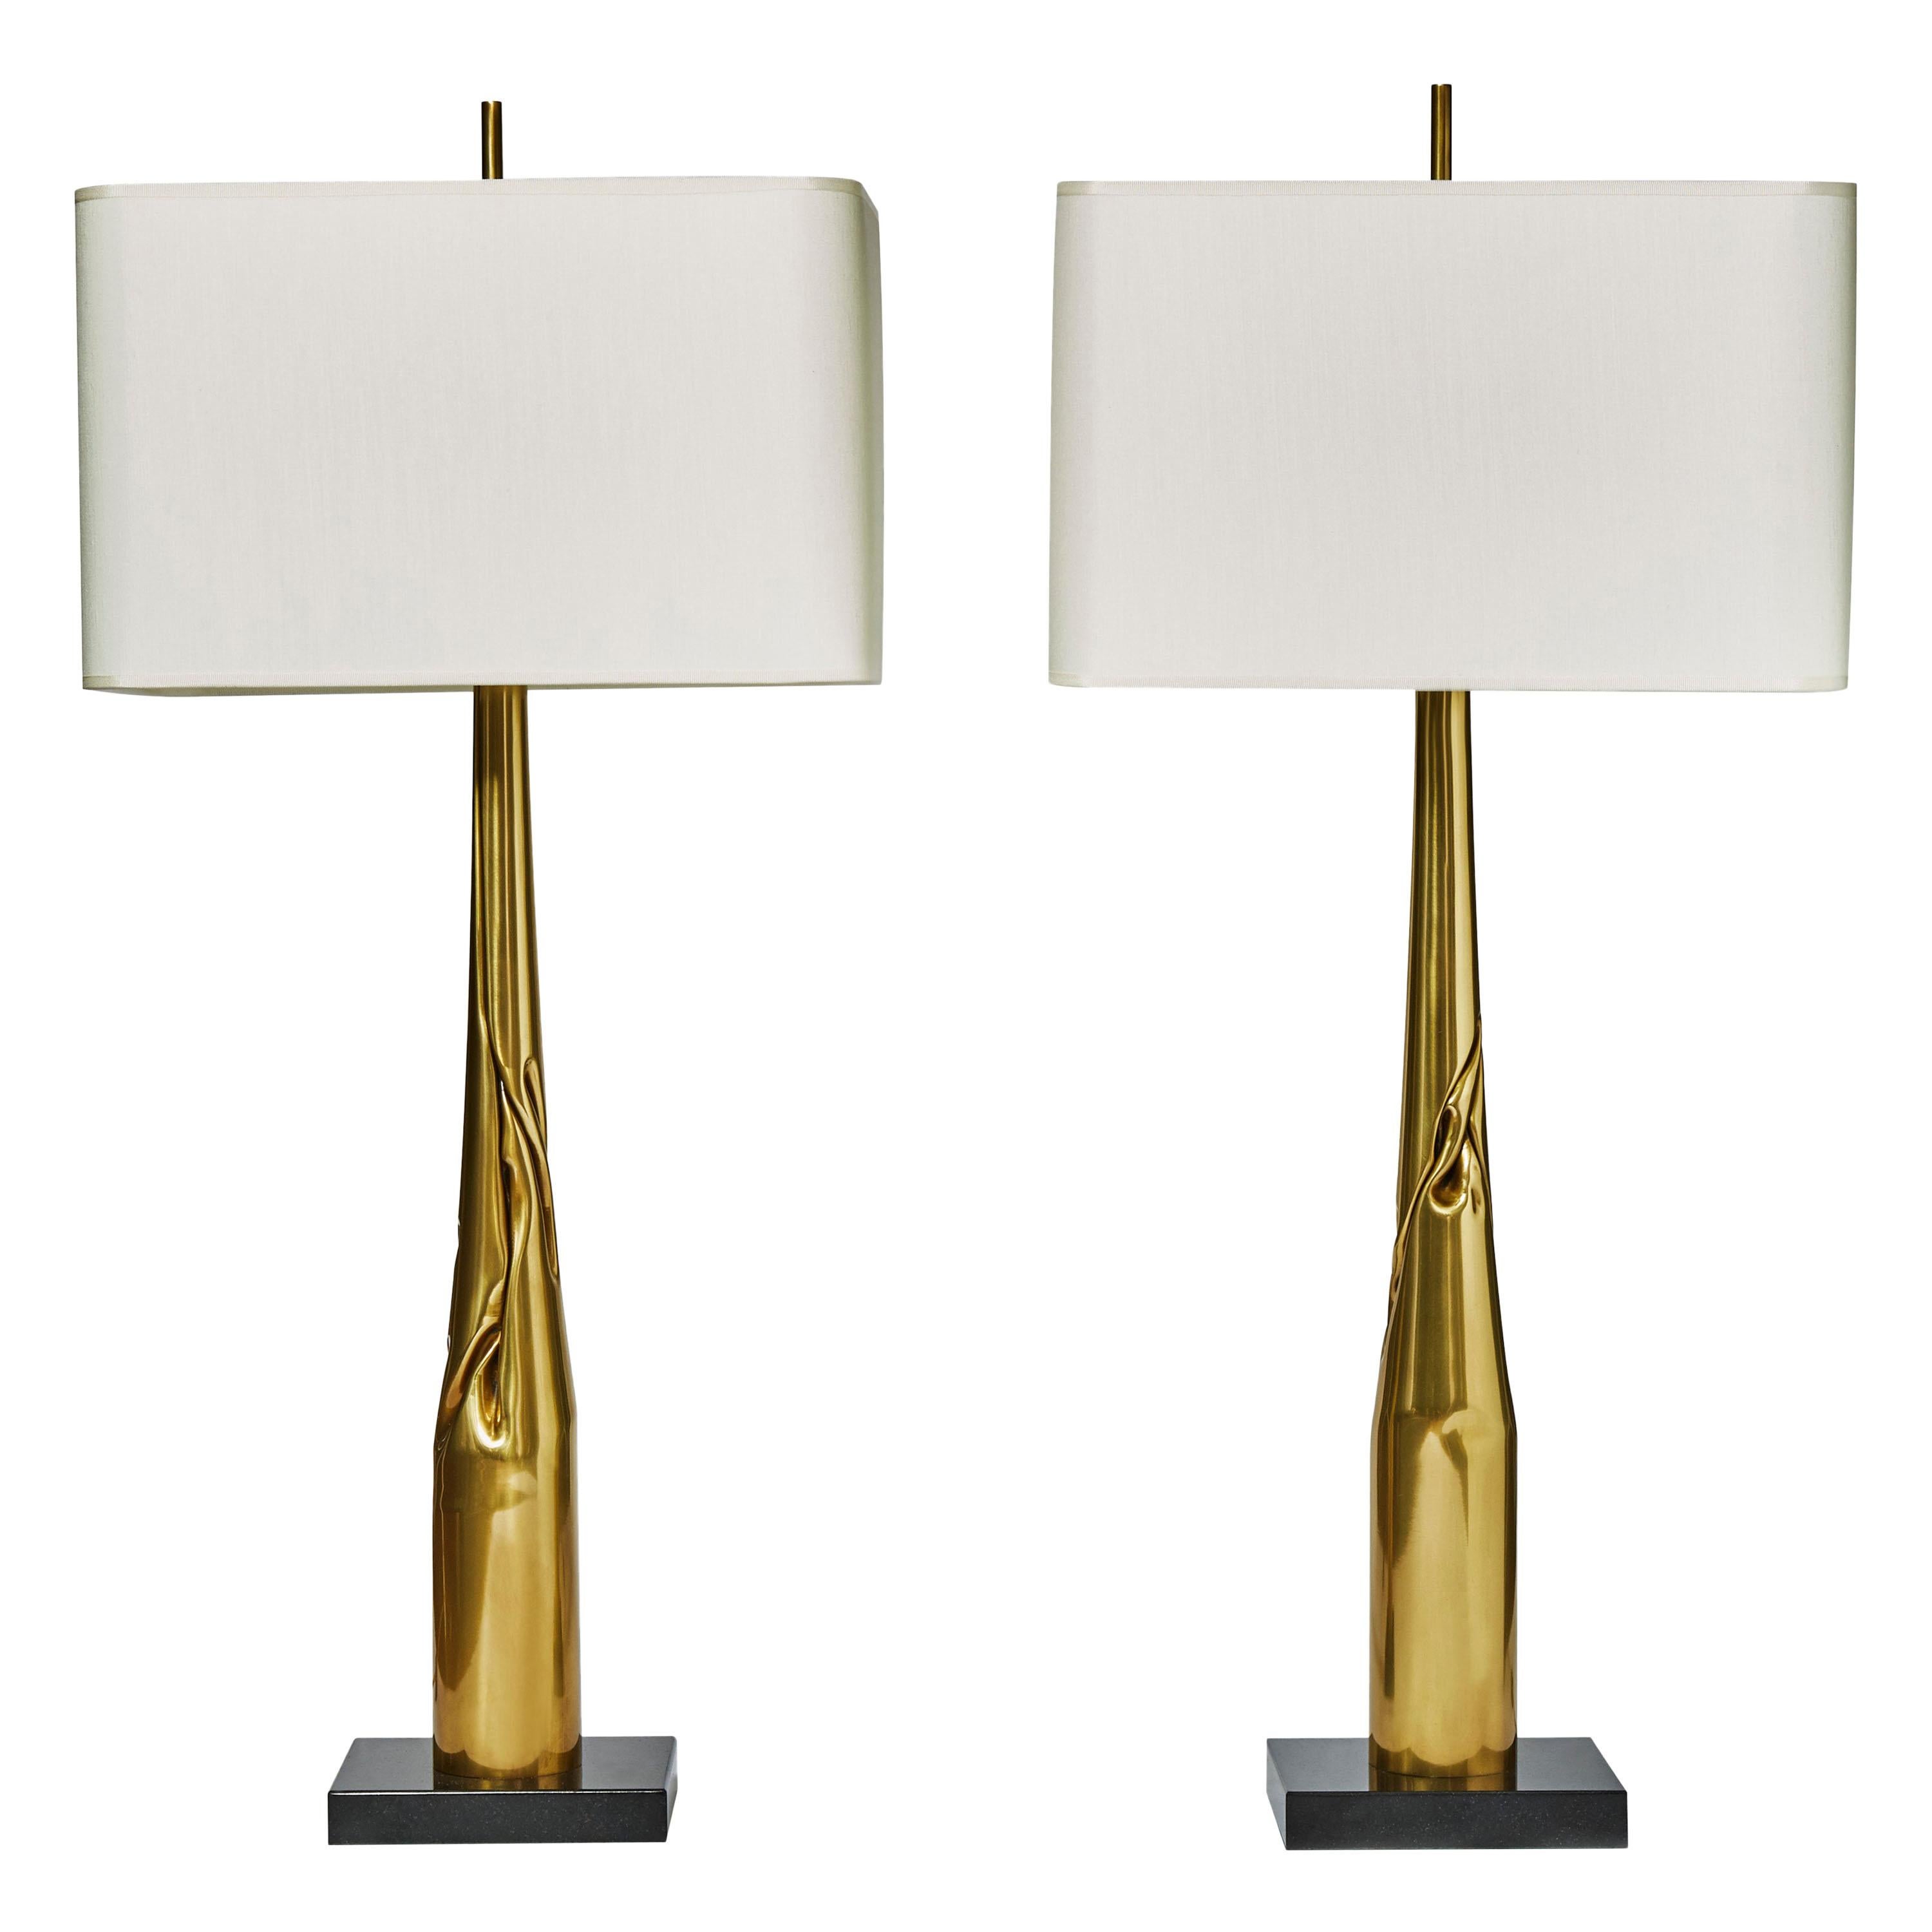 Pair of Spectre Table Lamps by Esperia for Glustin Luminaires